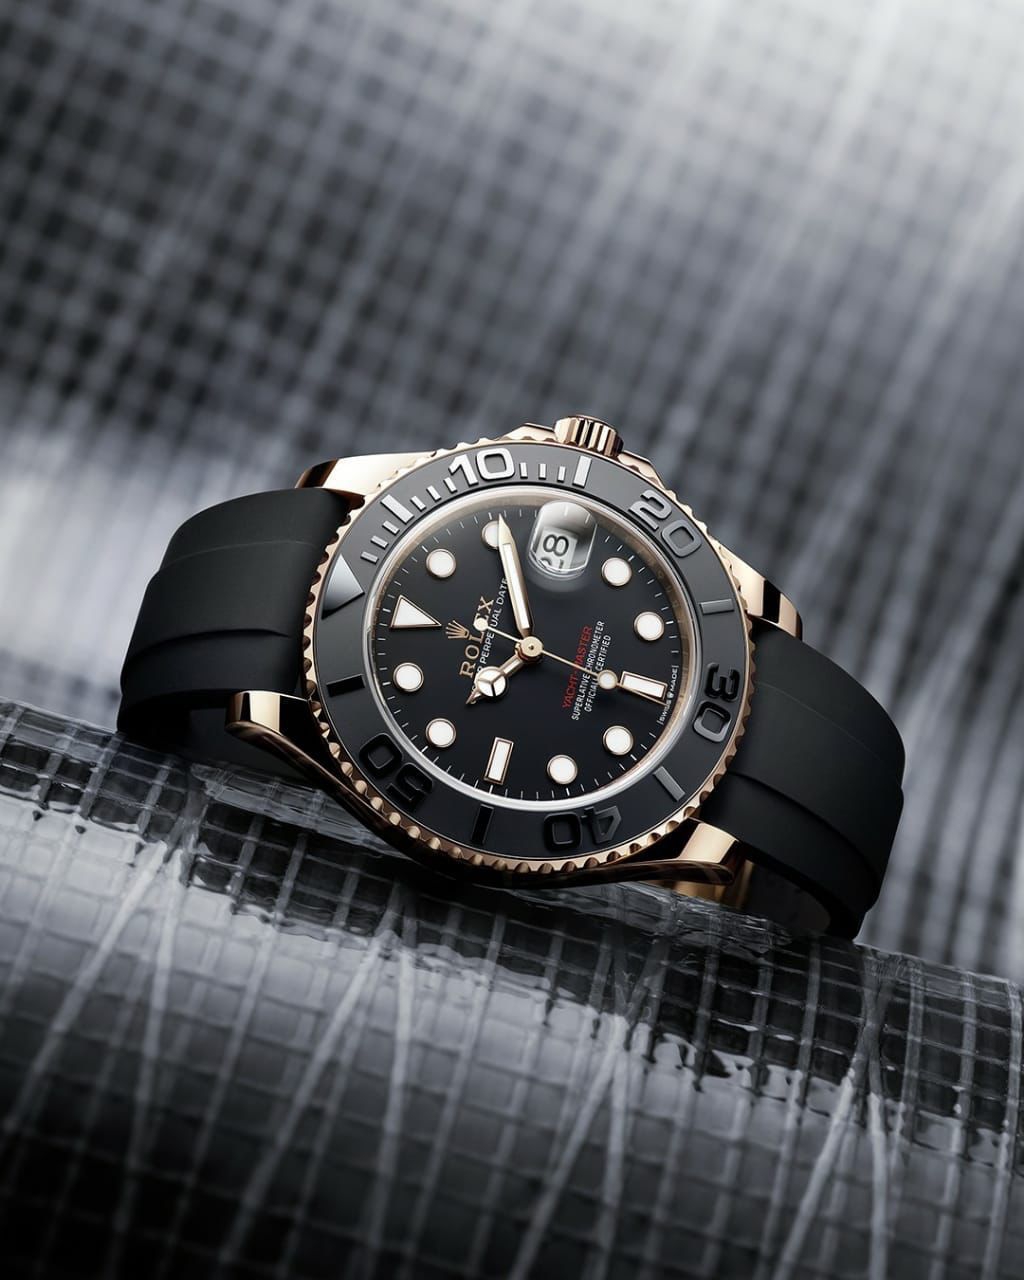 Rolex Yacht-Master Oyster edition with smart fit design now Available & Ready to ship today